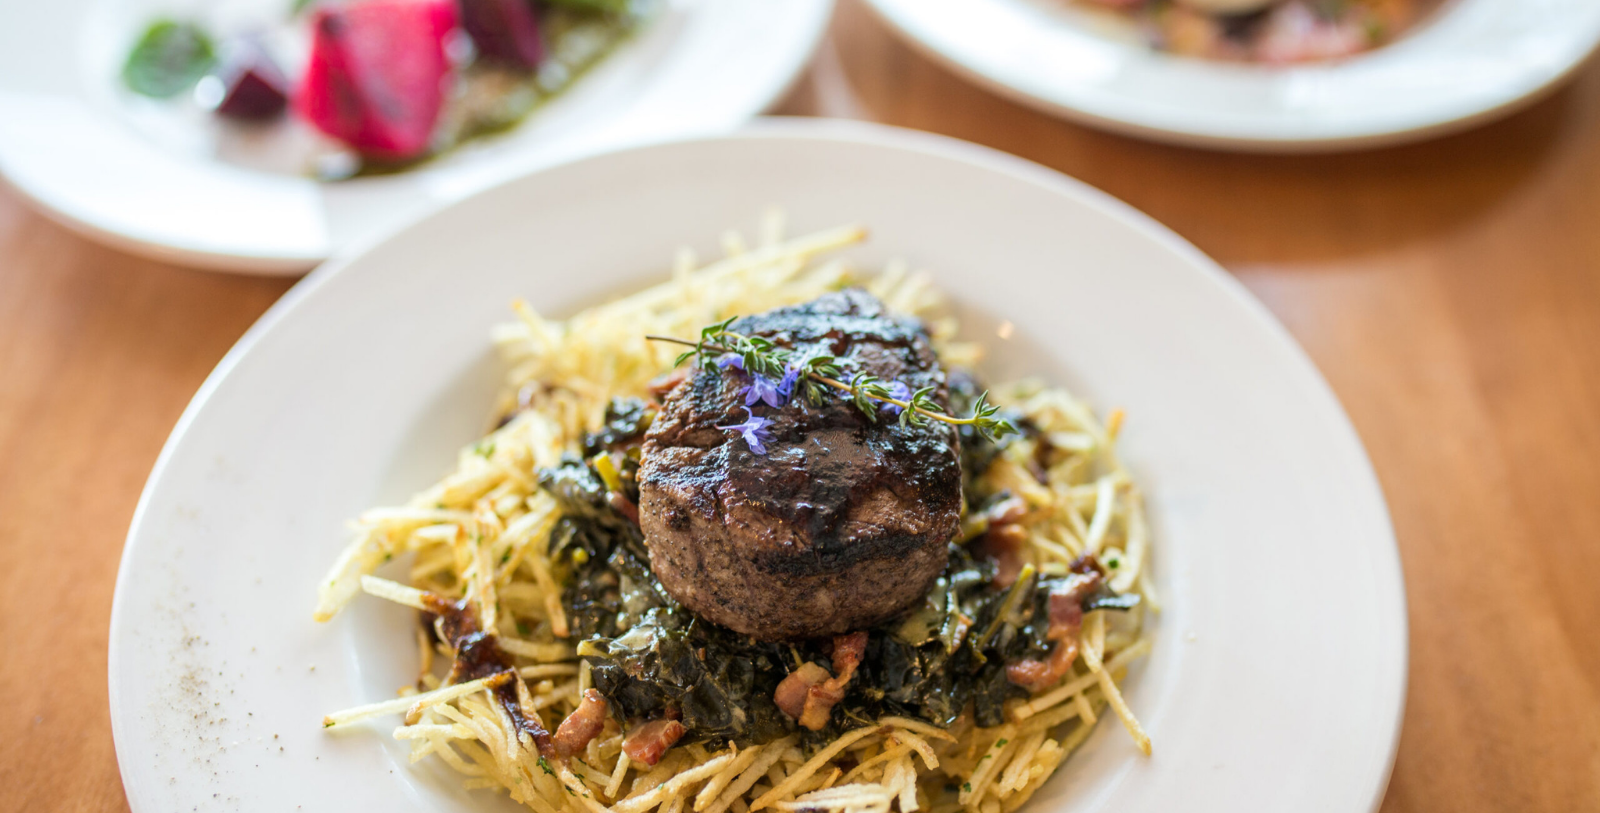 Taste delicious farm-to-table meals at Larks Home Kitchen Cuisine.